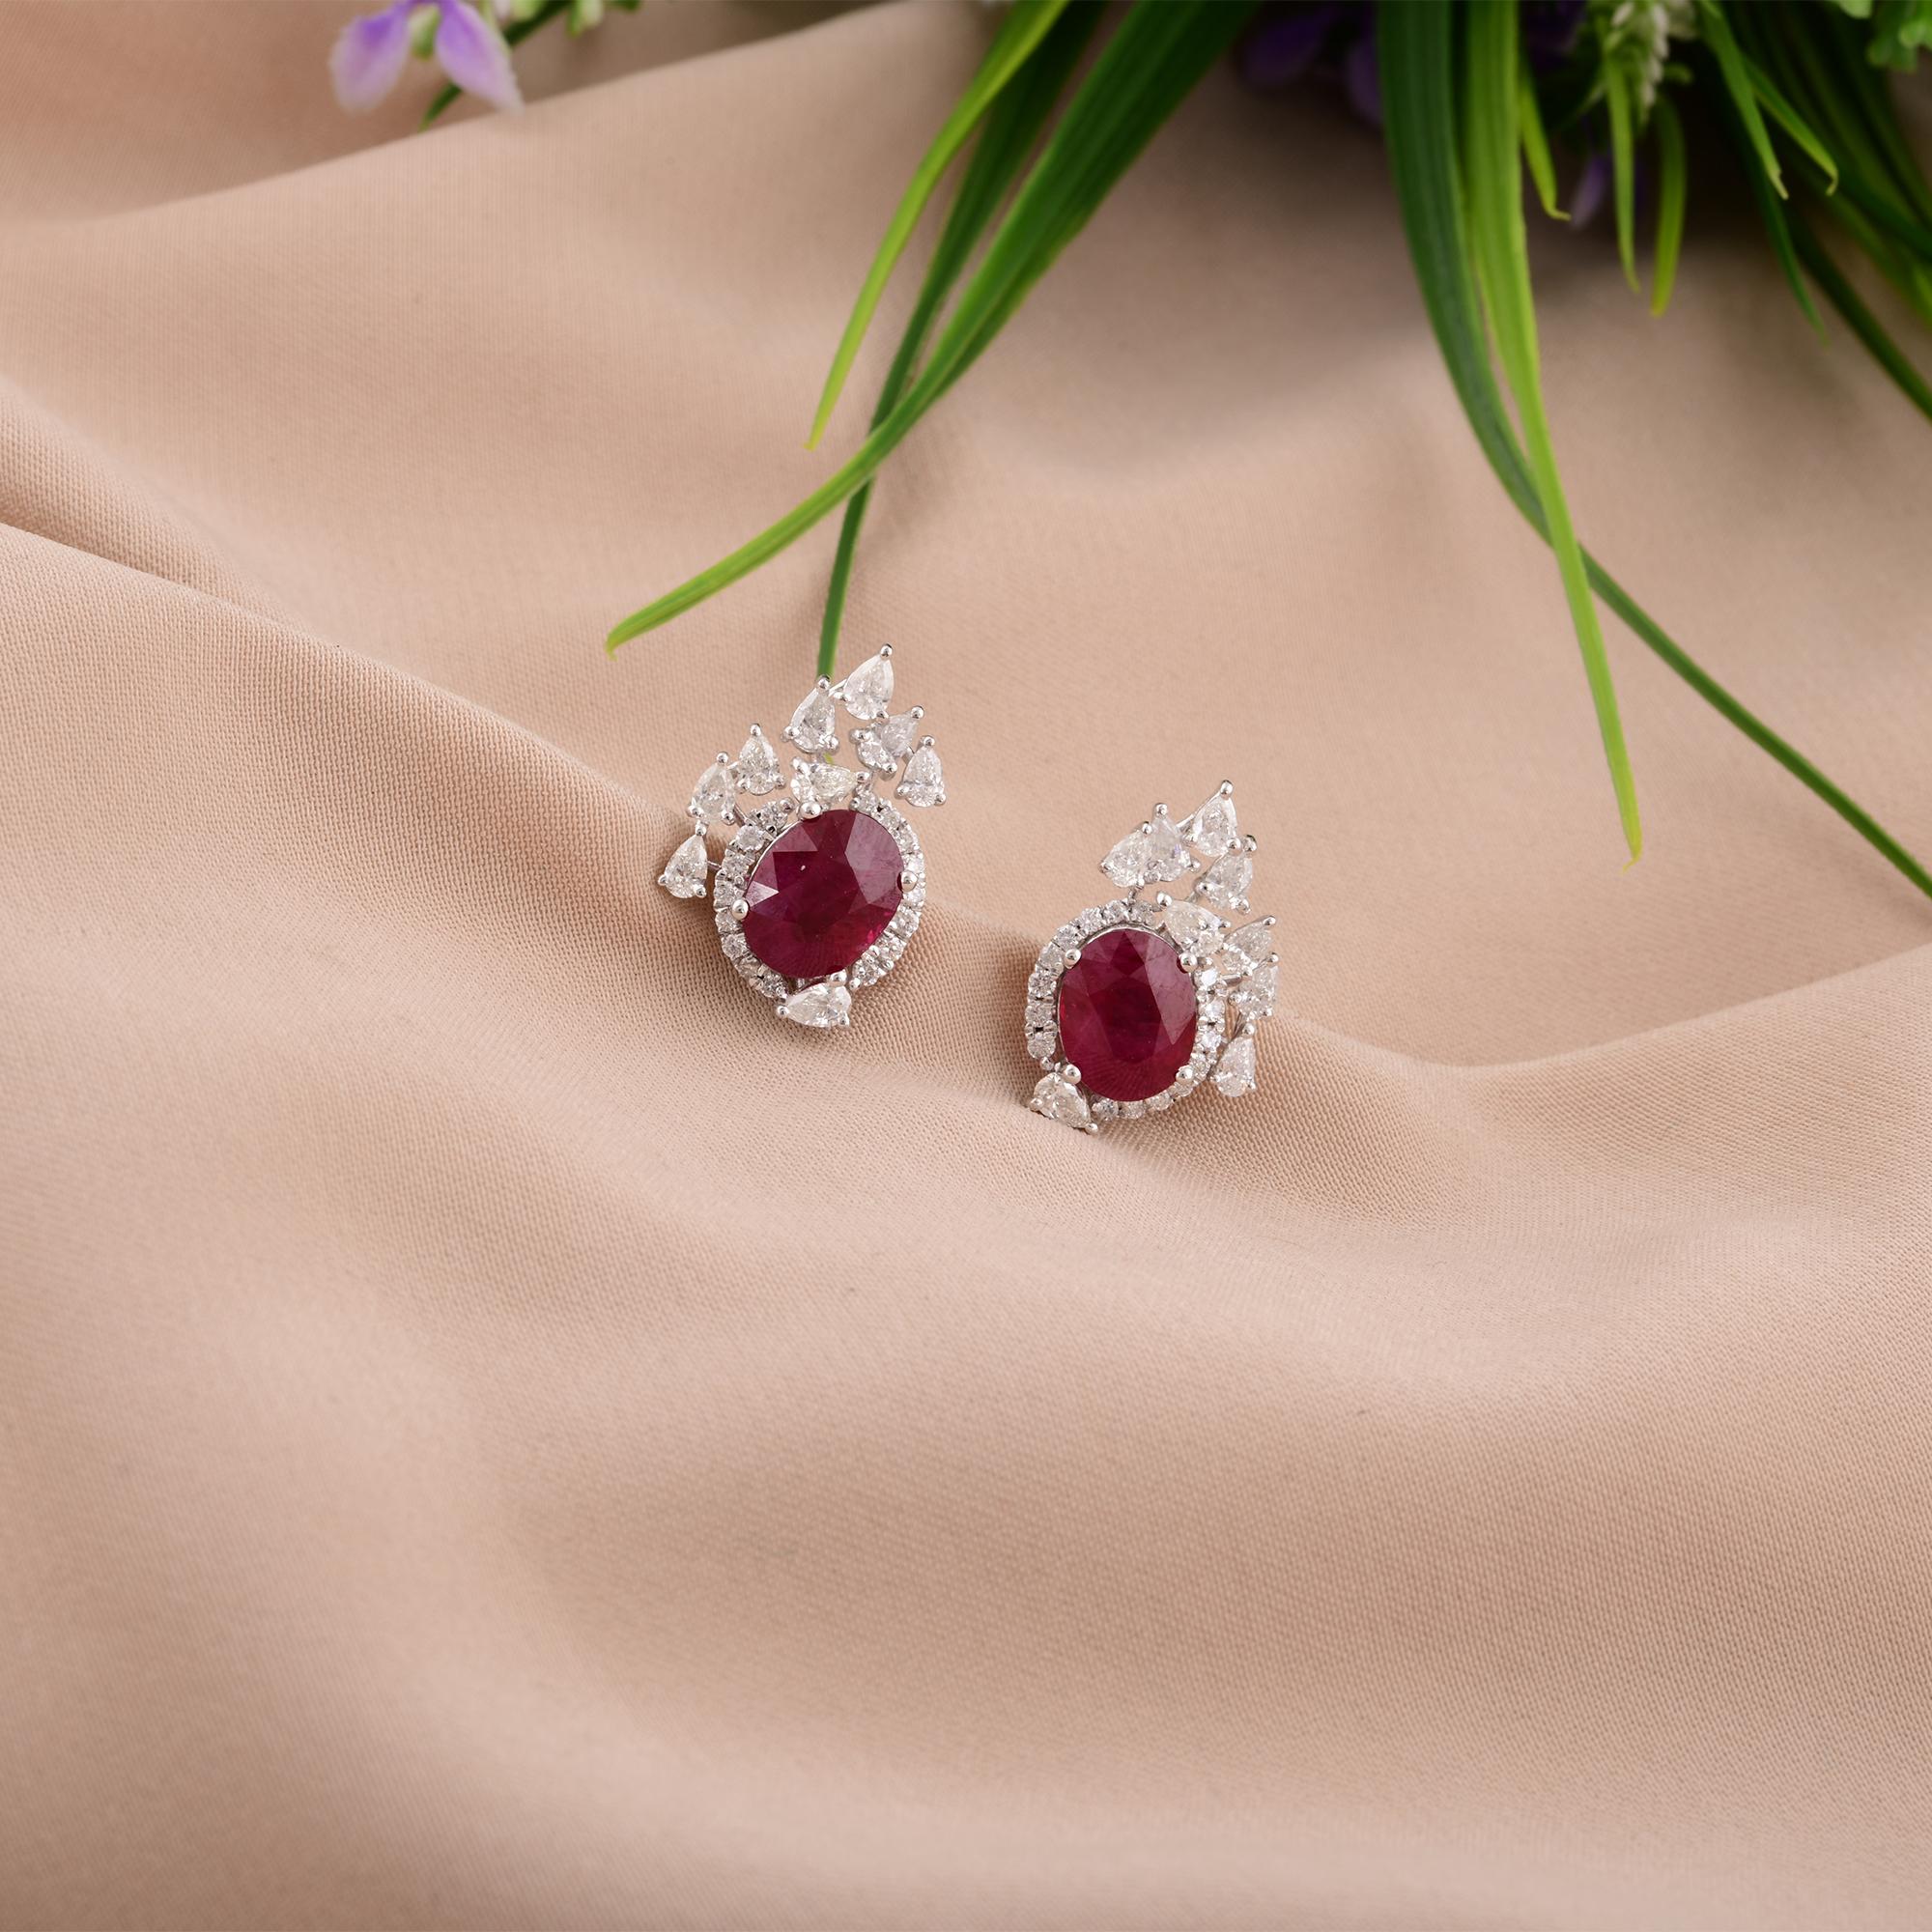 Surrounding the rubies are sparkling diamonds, expertly set in intricate 14 karat white gold settings. The diamonds enhance the beauty of the rubies, creating a captivating contrast that accentuates their natural brilliance and allure.

Item Code :-